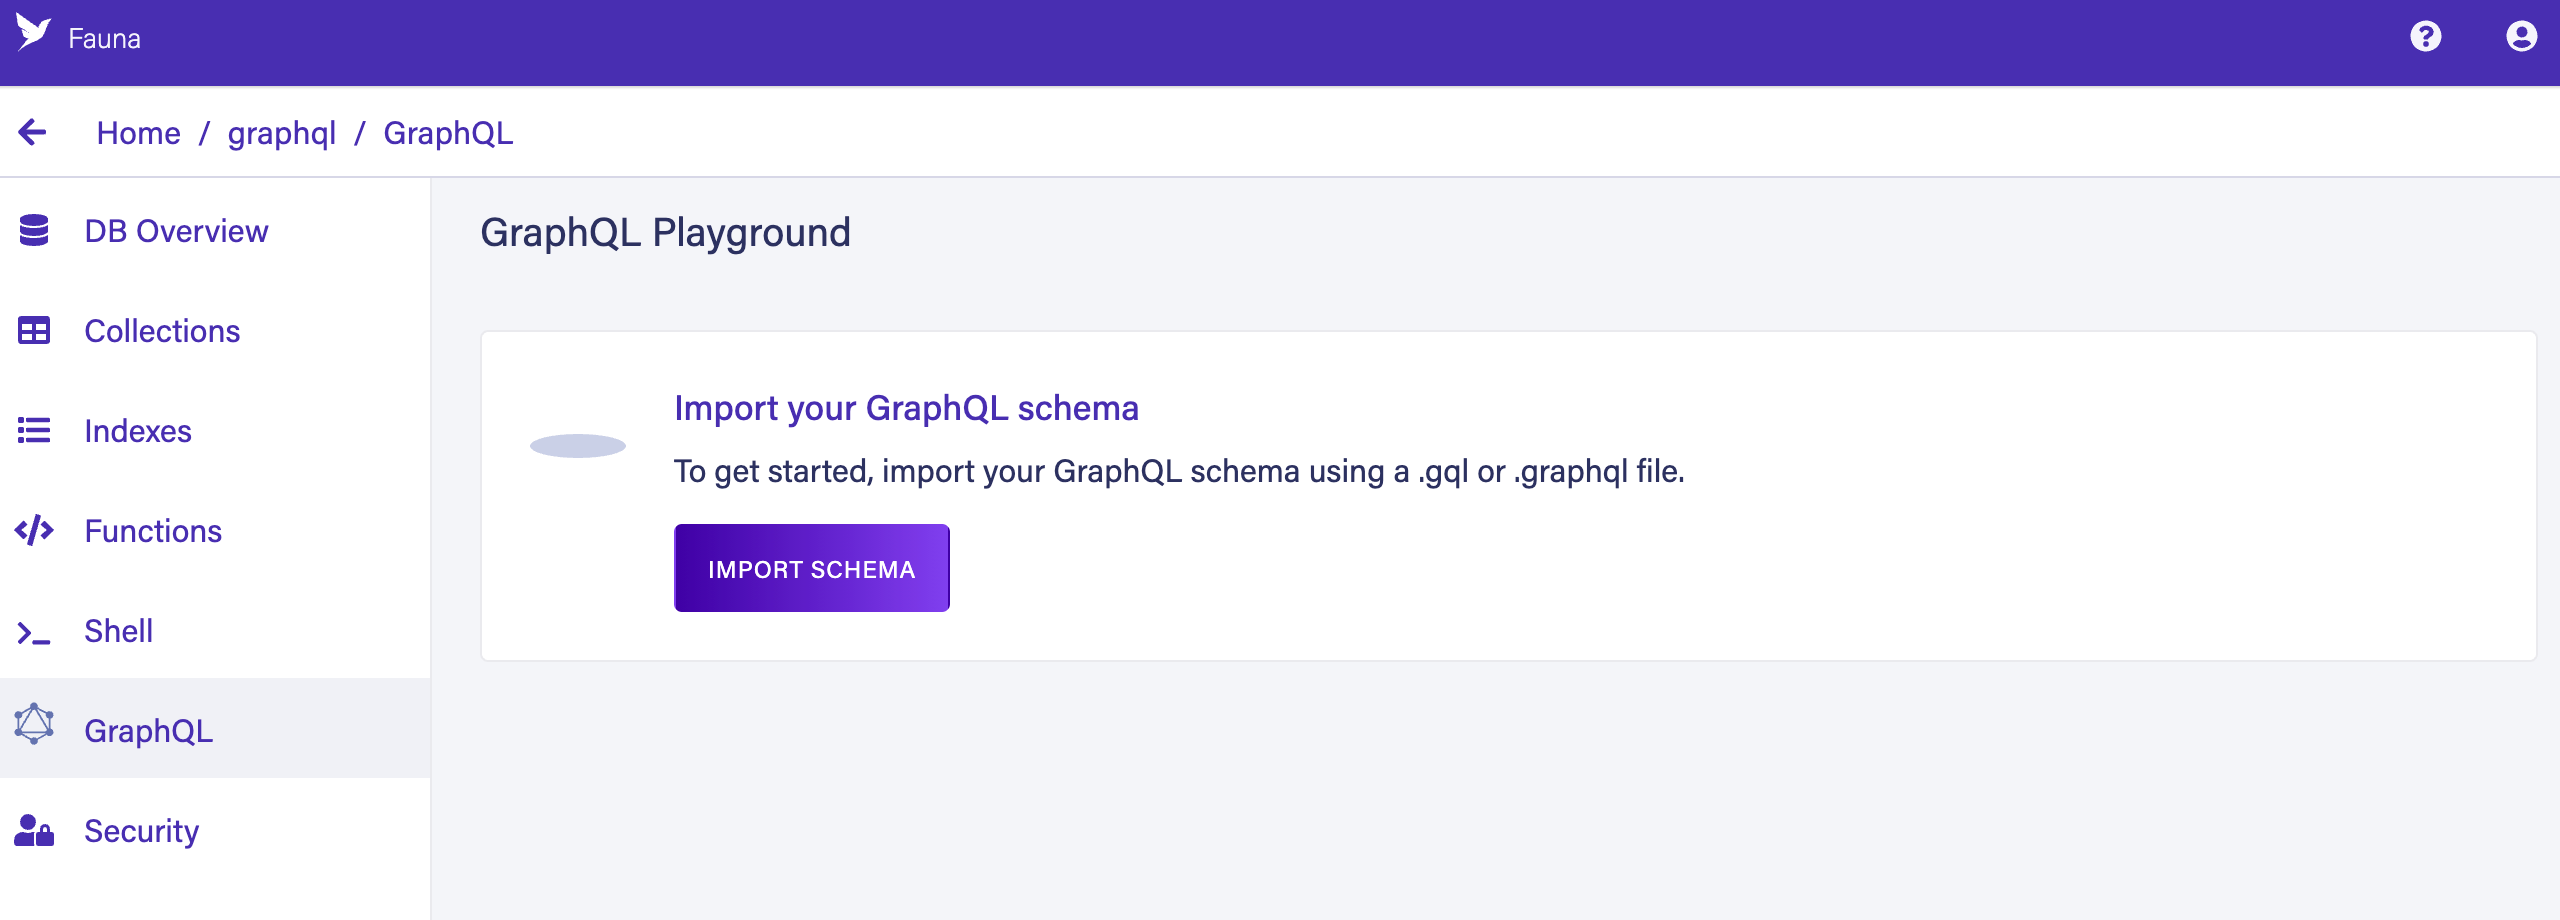 The Import your GraphQL schema page